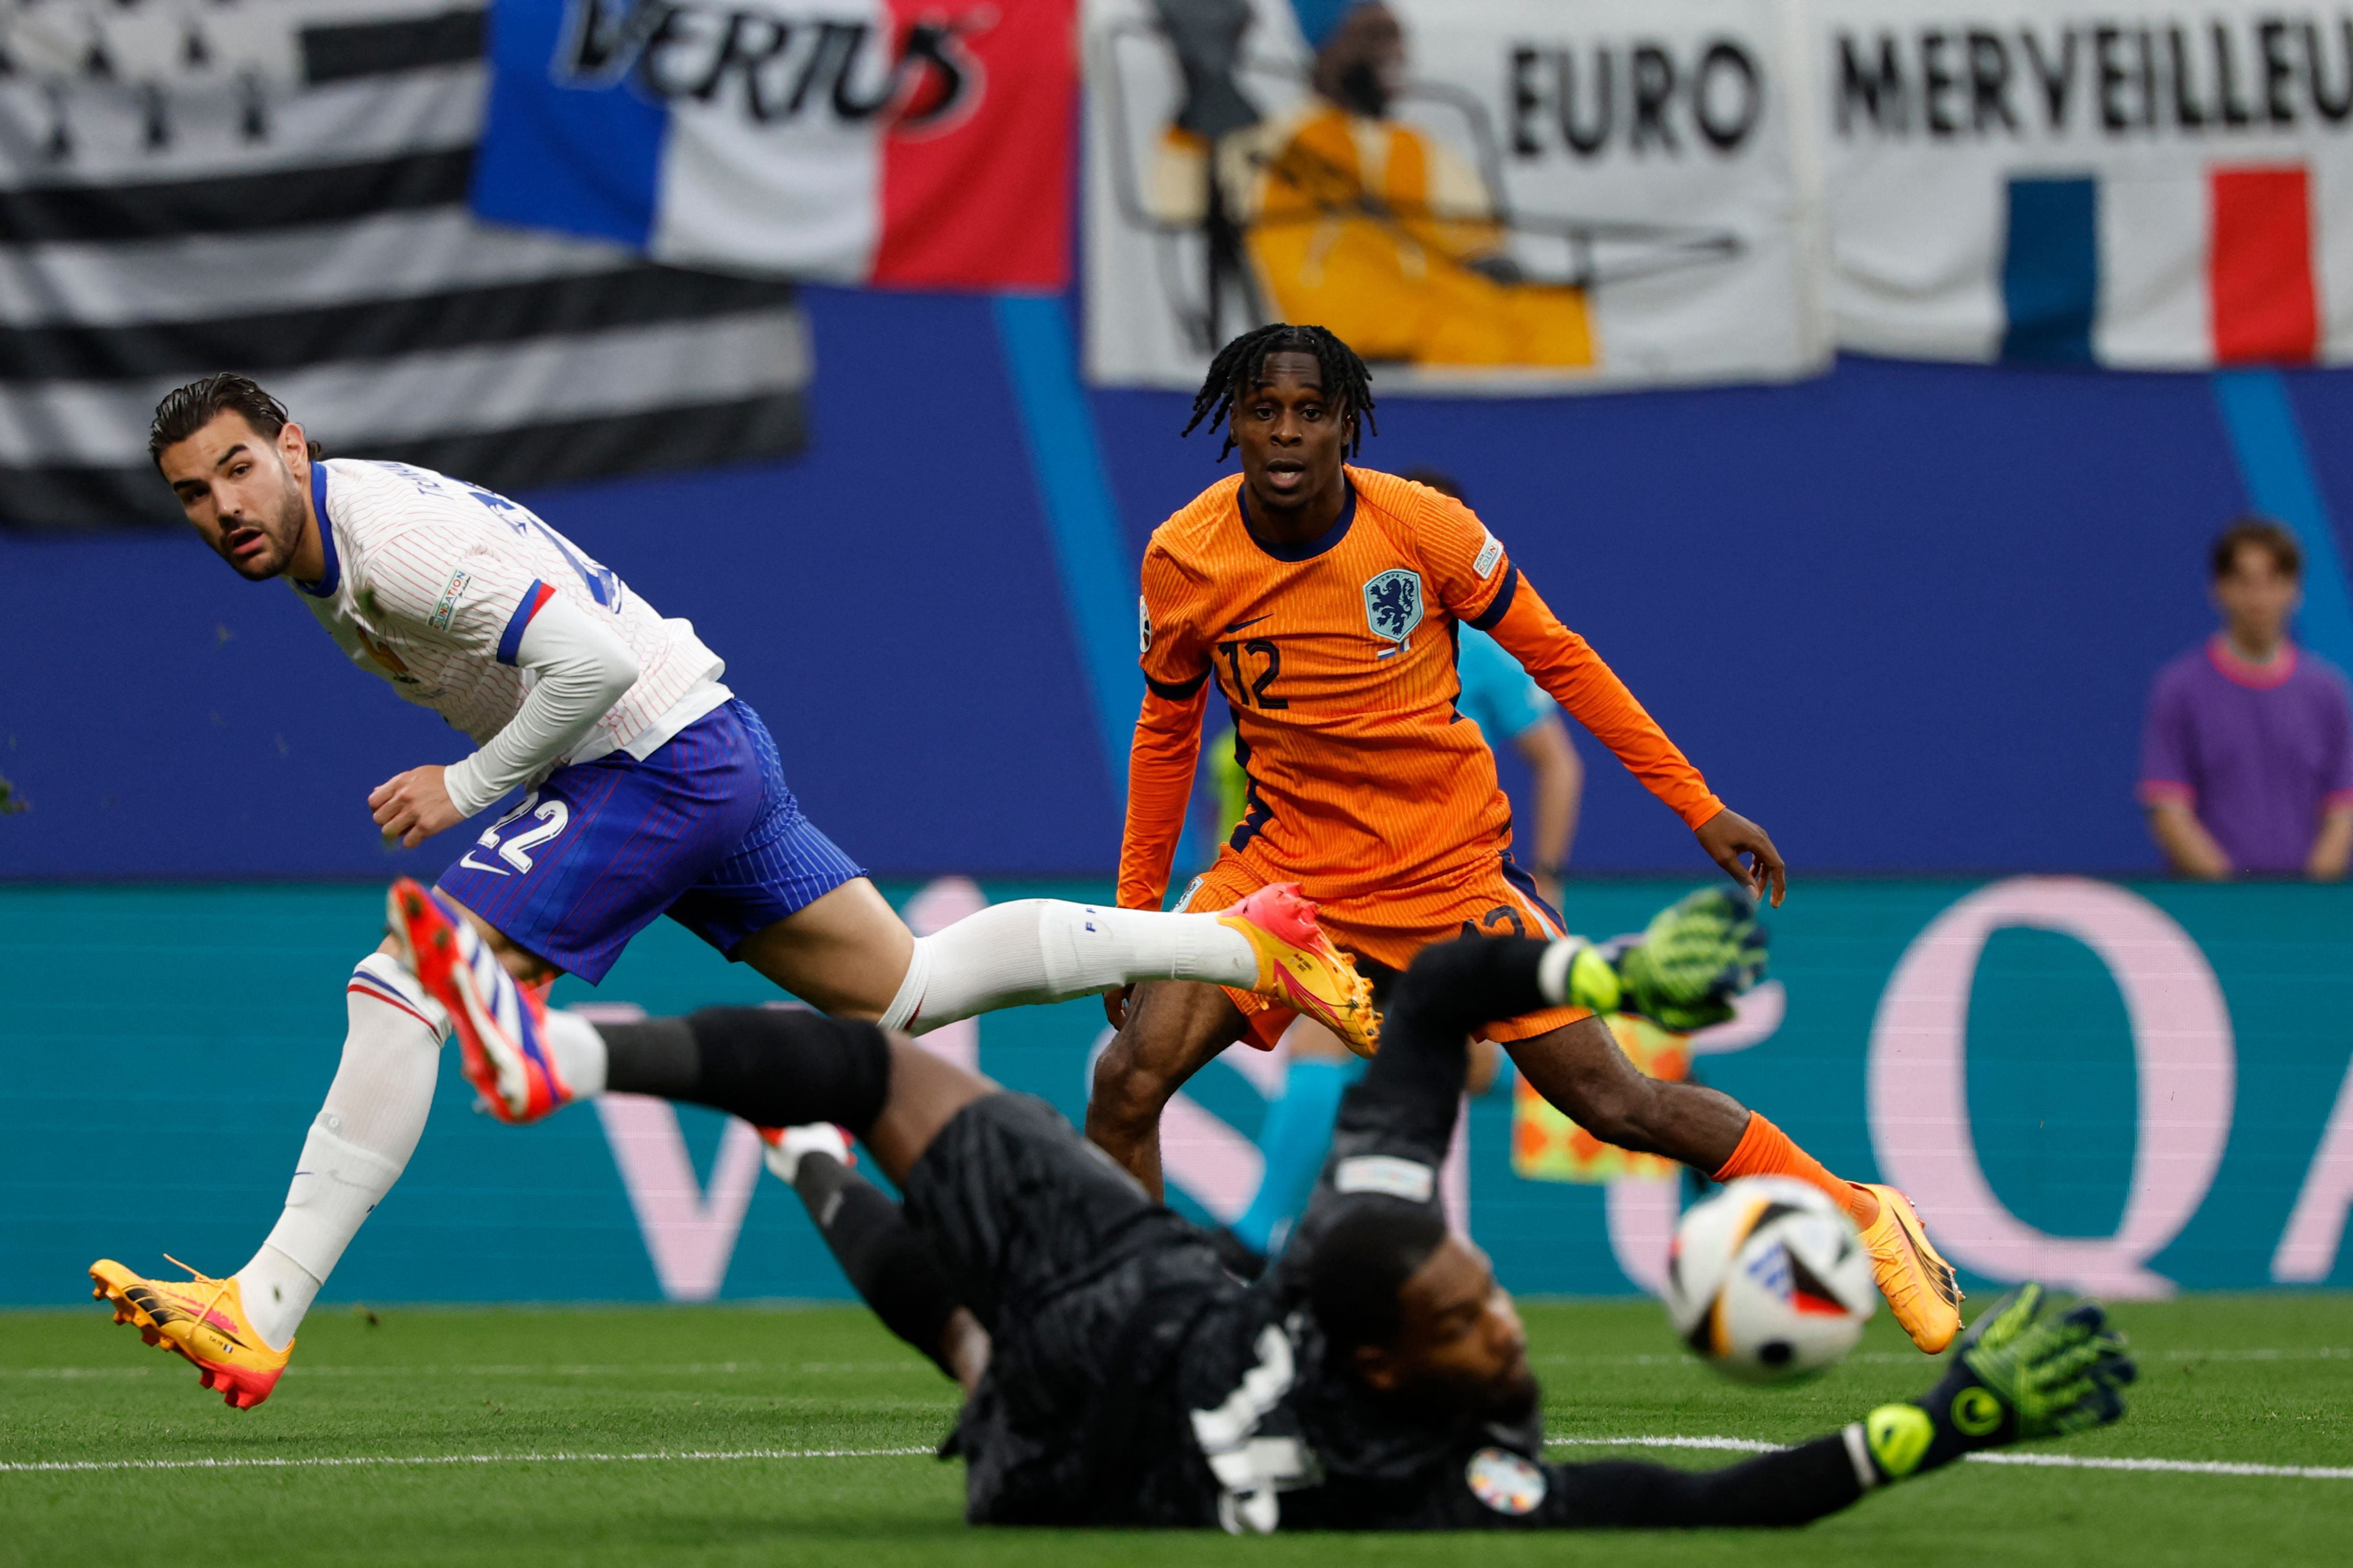 (From L) France's goalkeeper #16 Mike Maignan (Front) deflects a shot by Netherlands' forward #12 Jeremie Frimpong (R) as France's defender #22 Theo Hernandez looks on during the UEFA Euro 2024 Group D football match between the Netherlands and France at the Leipzig Stadium in Leipzig on June 21, 2024. (Photo by Odd ANDERSEN / AFP)